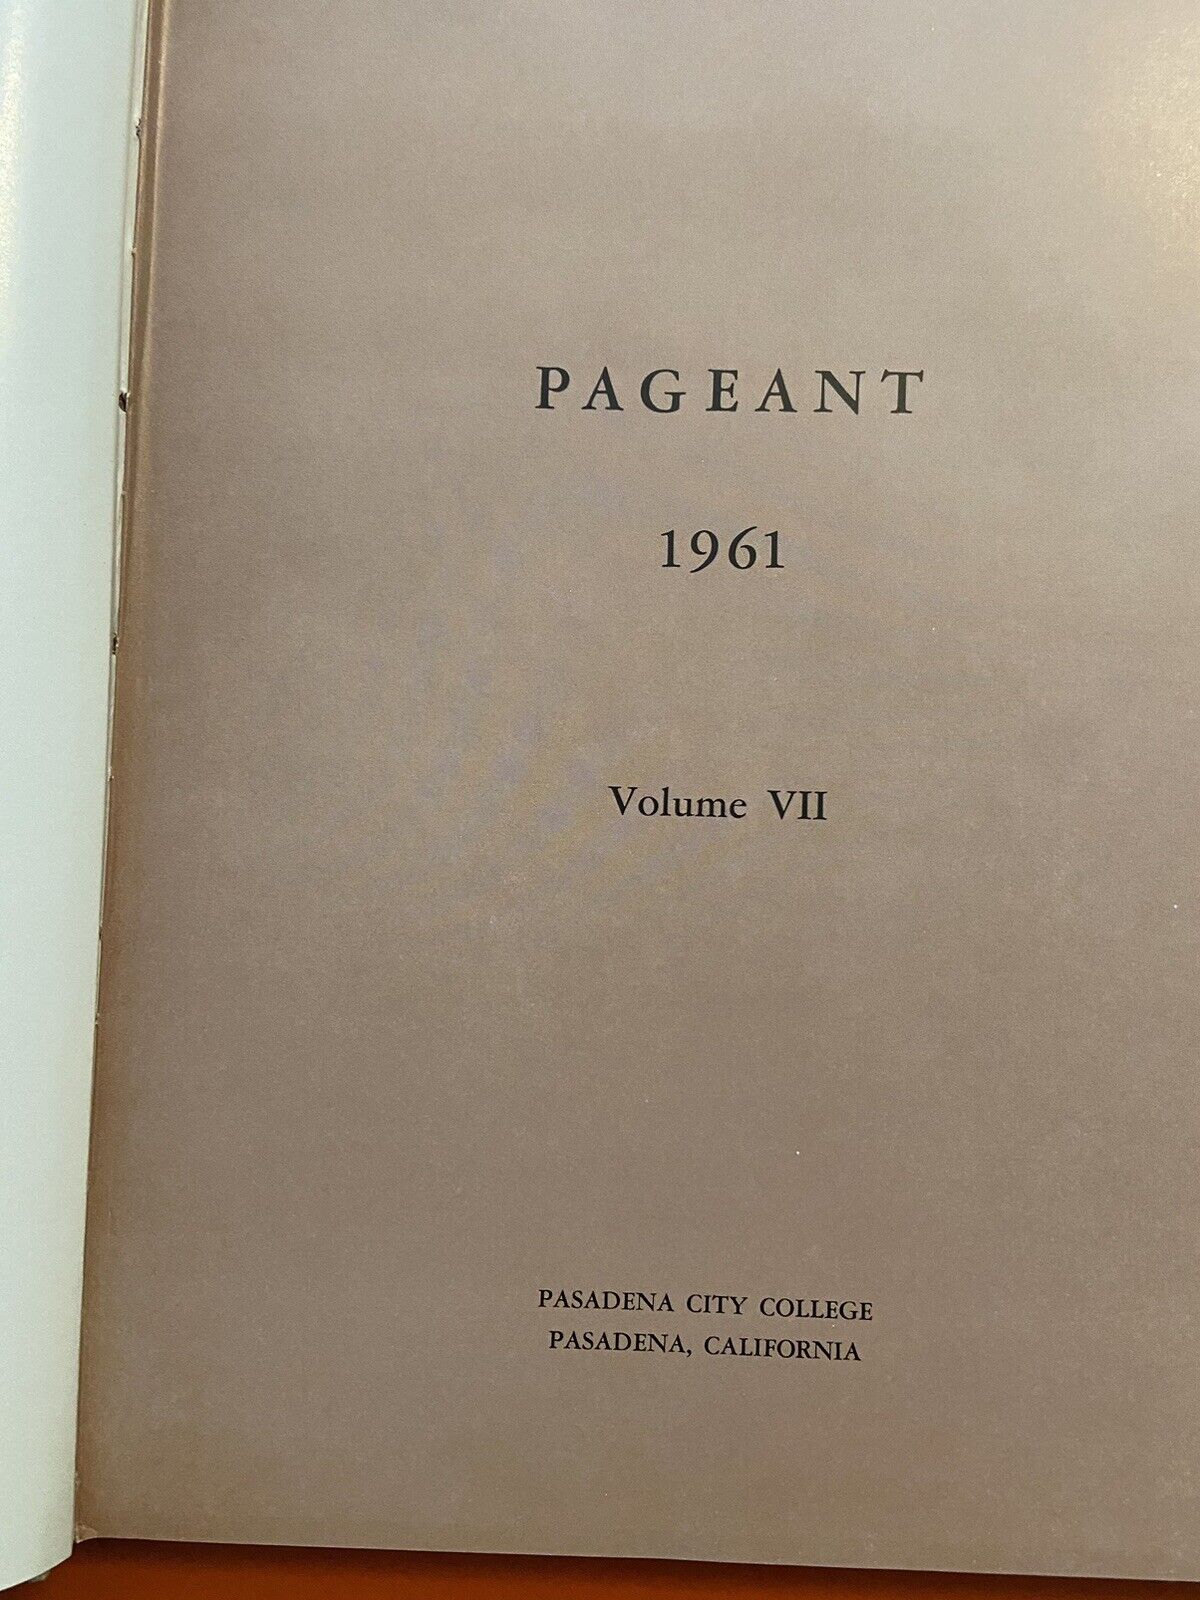 Yearbook 1961, Pasadena City College California, 61 Pageant, Good Cond, Annual